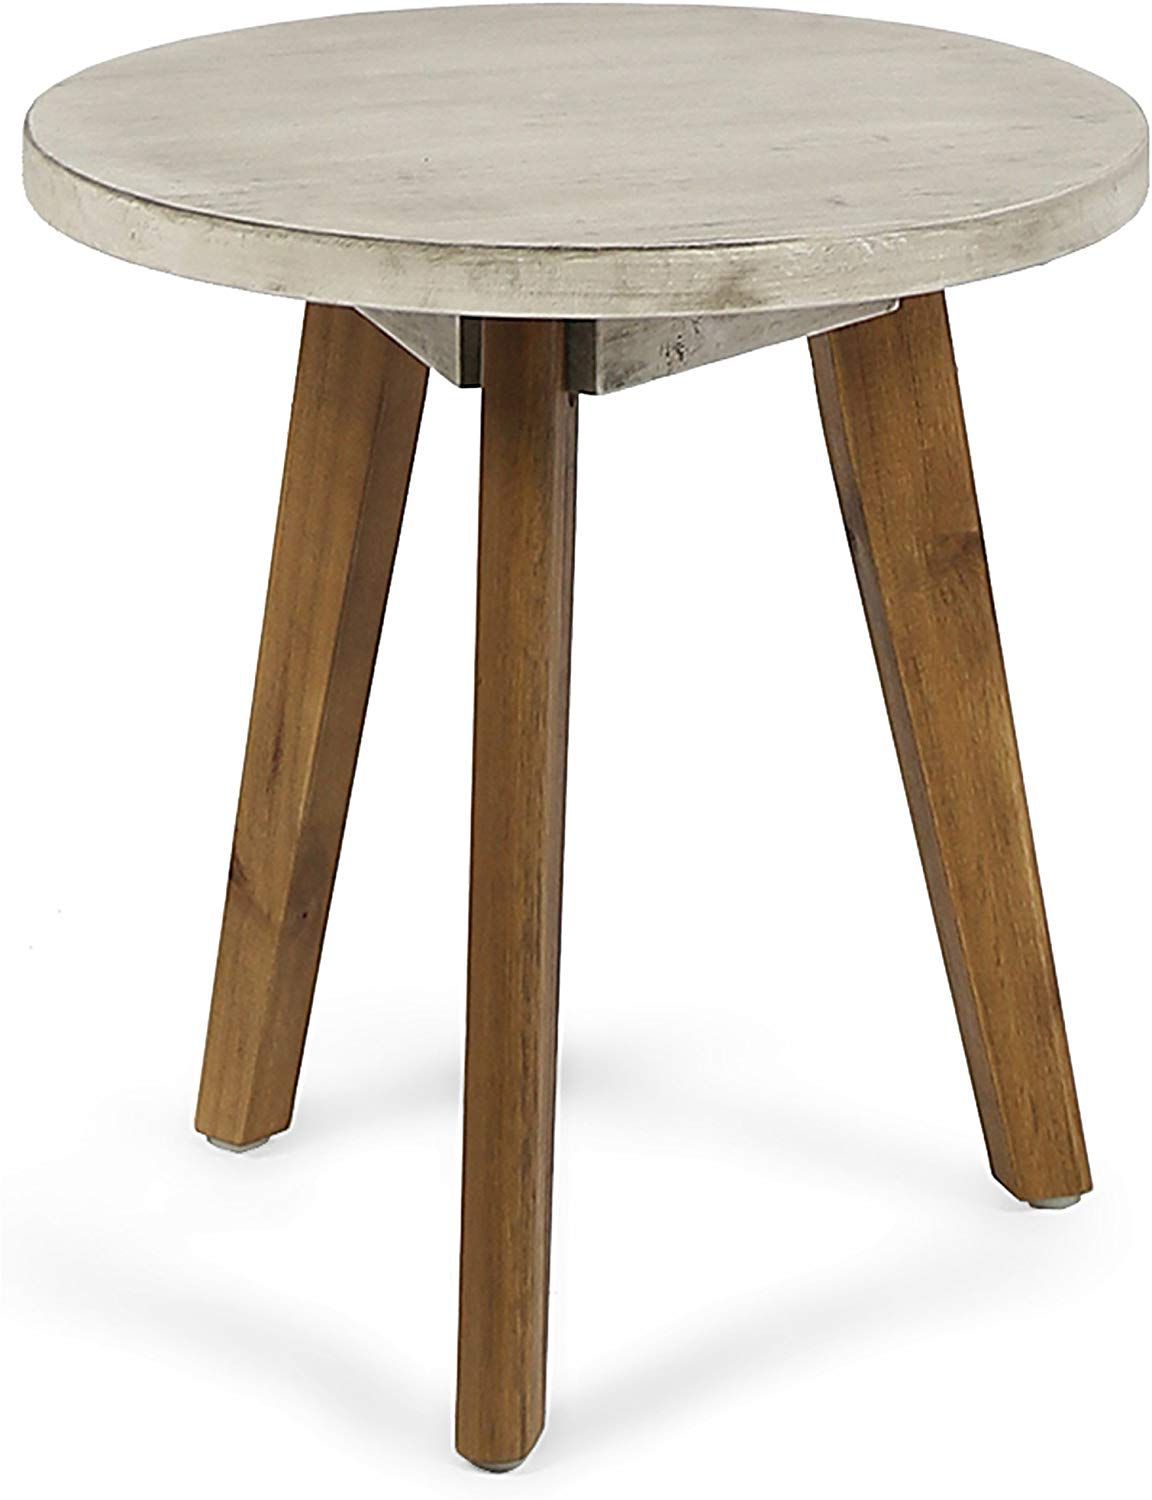 Amazonsmile : Christopher Knight Home 305359 Gino Outdoor Acacia Wood Intended For Preferred Natural Wood Outdoor Side Tables (View 4 of 15)